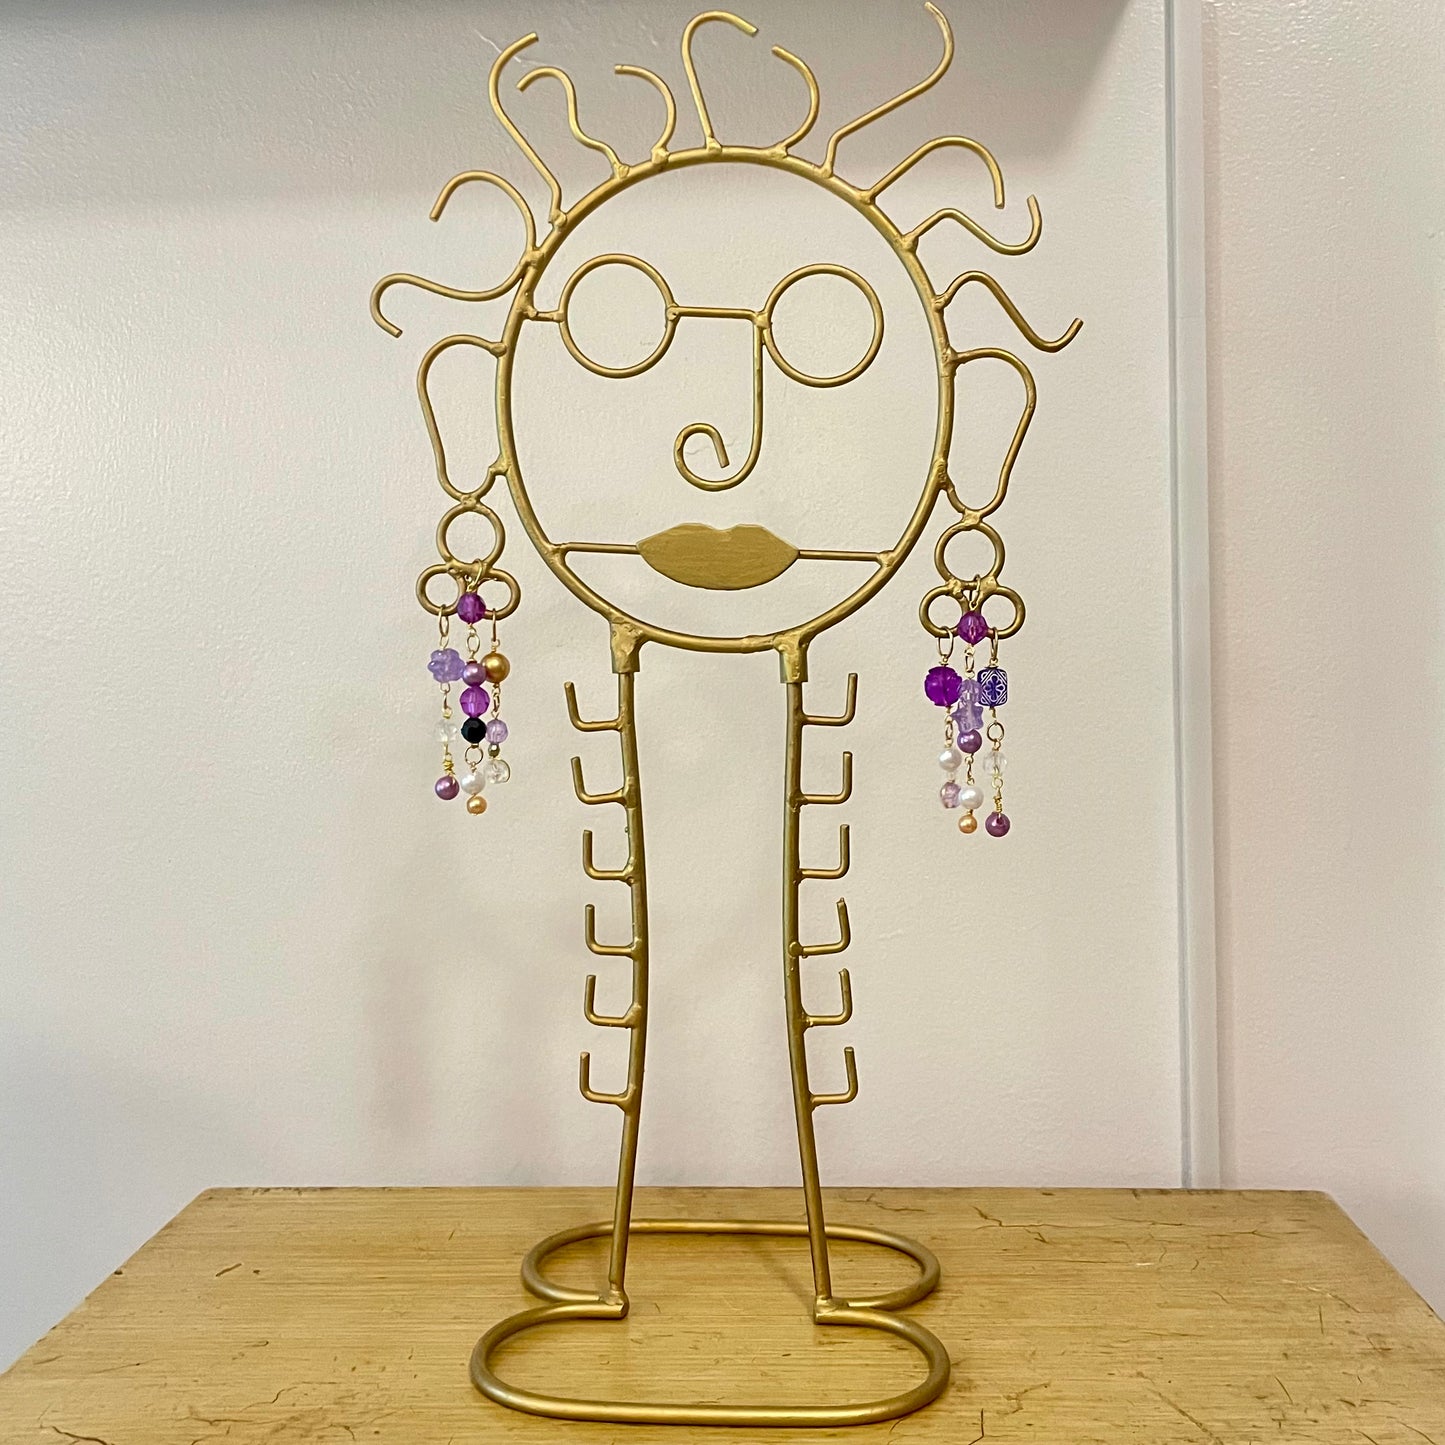 Up-cycled & Hand-beaded Face Silhouette Jewelry Stand, Whimsical Jewelry Tree